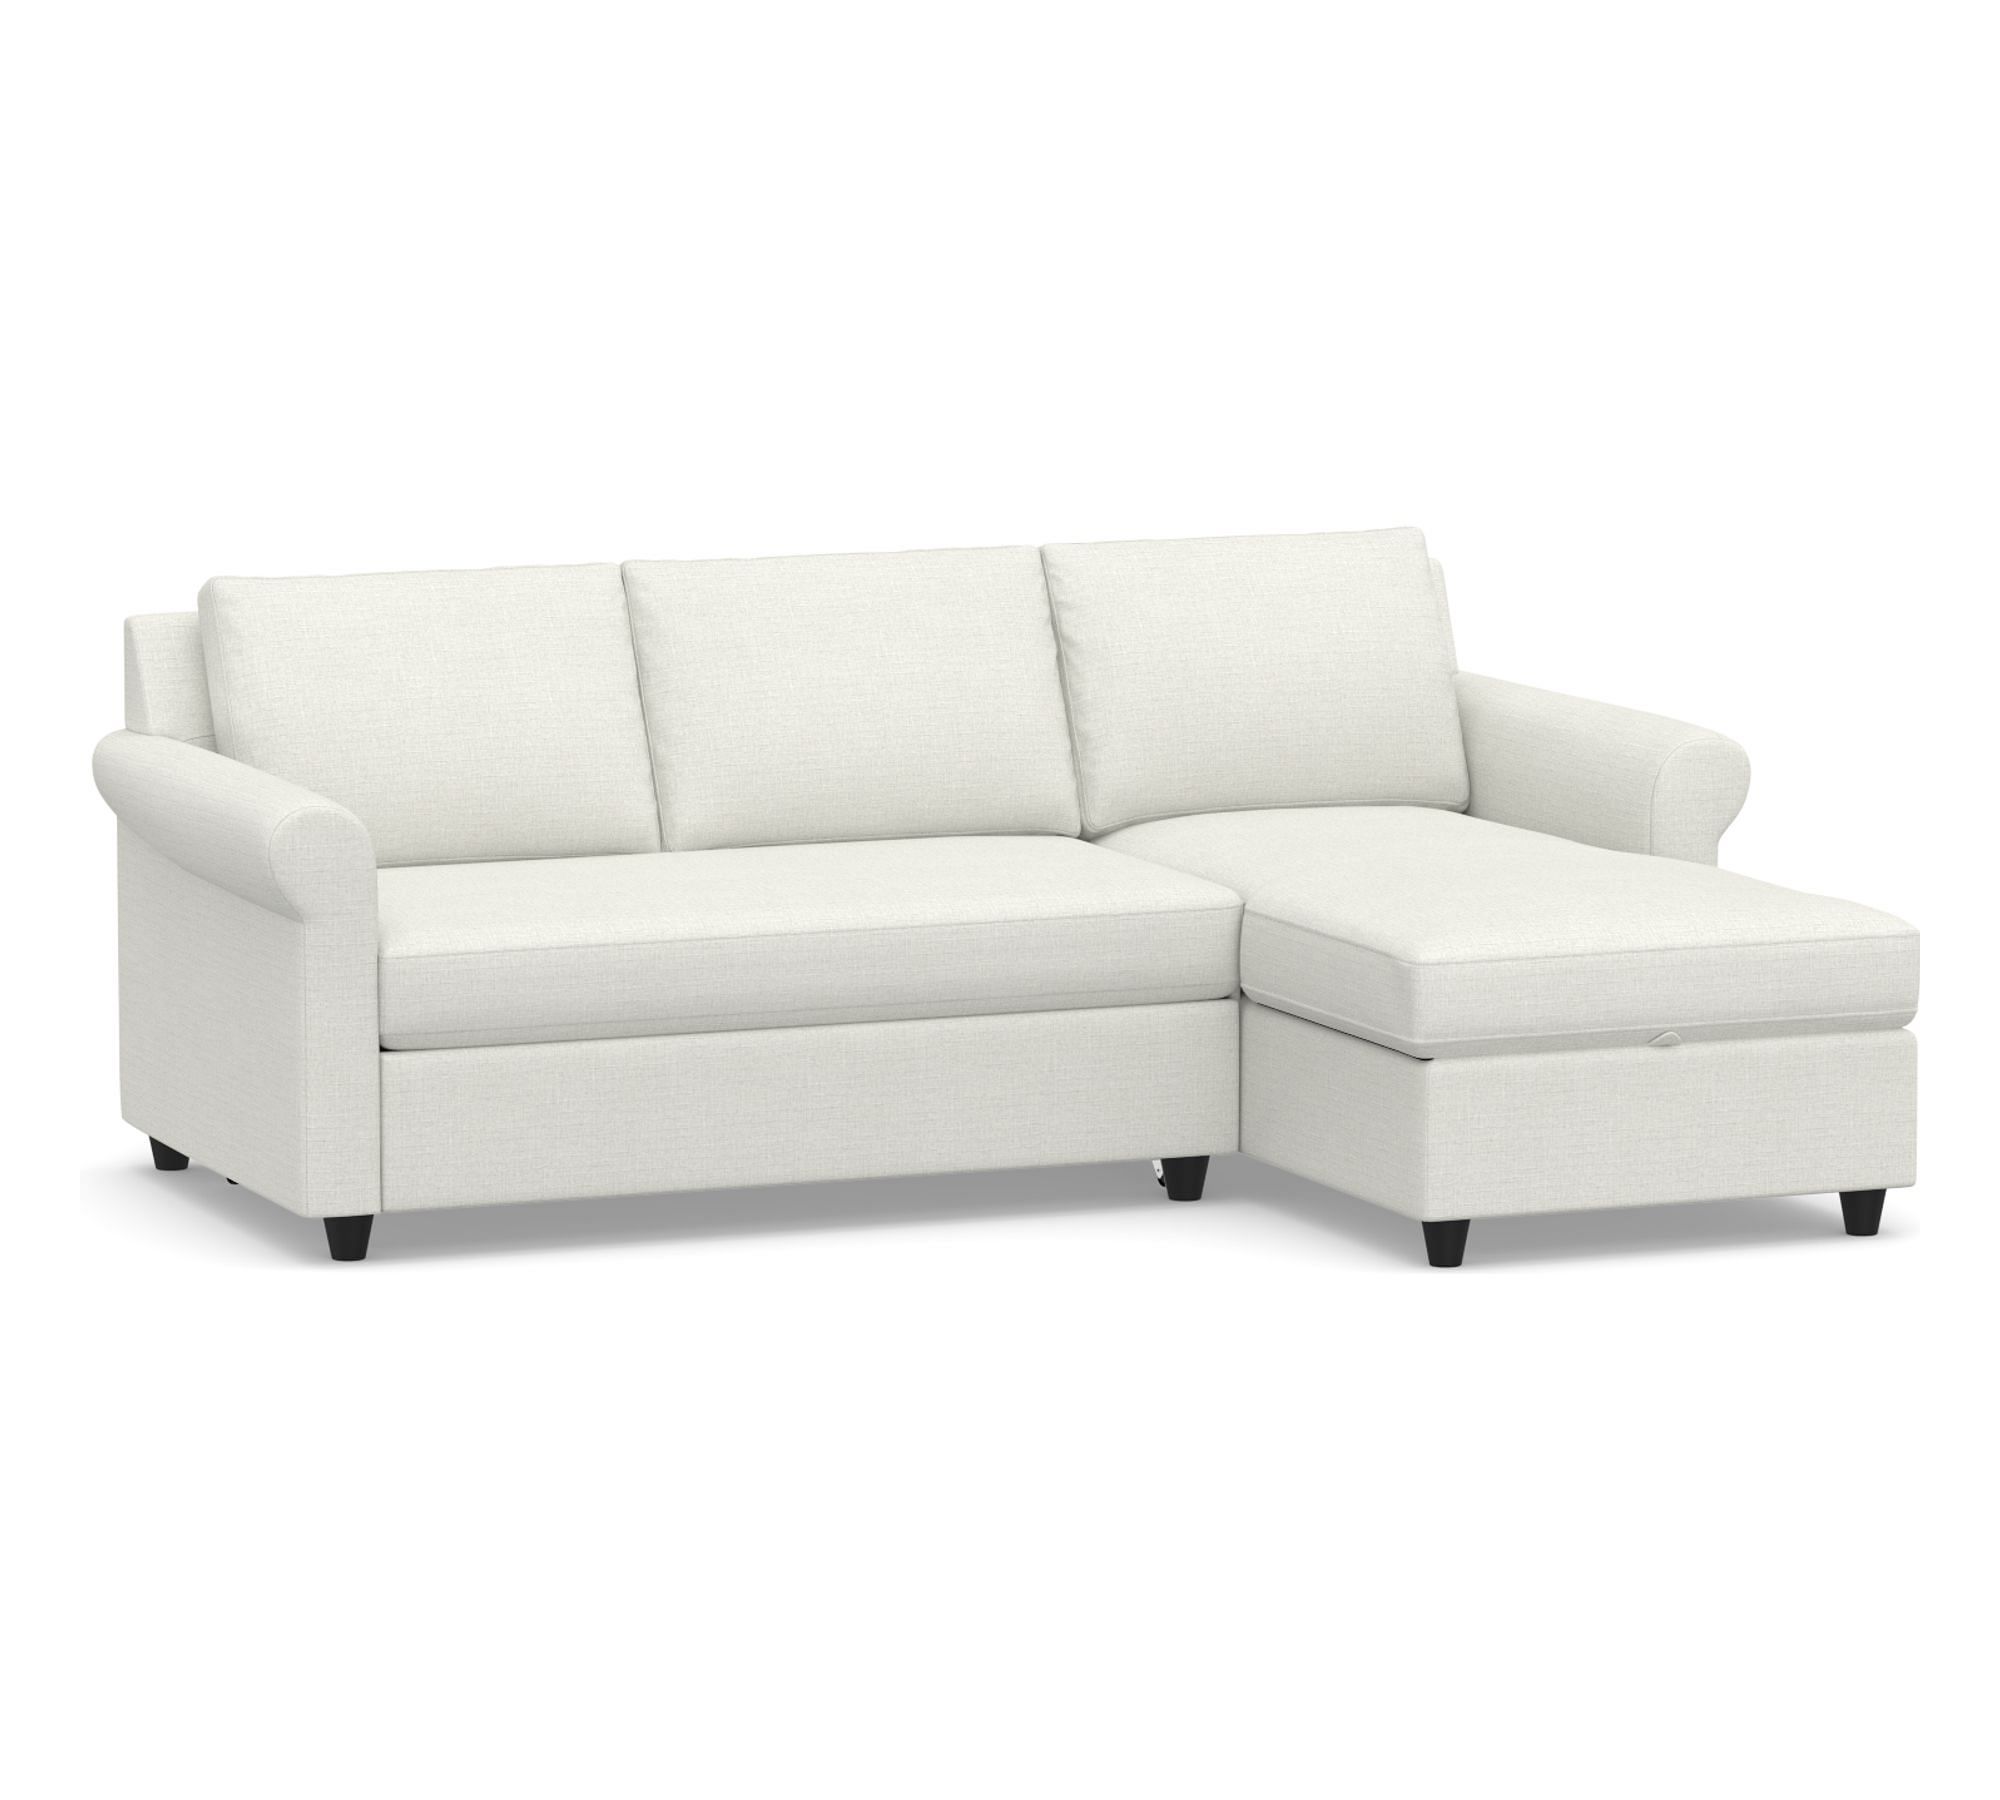 Sanford Roll Arm Trundle Sleeper Chaise Sectional - Storage Available (92")